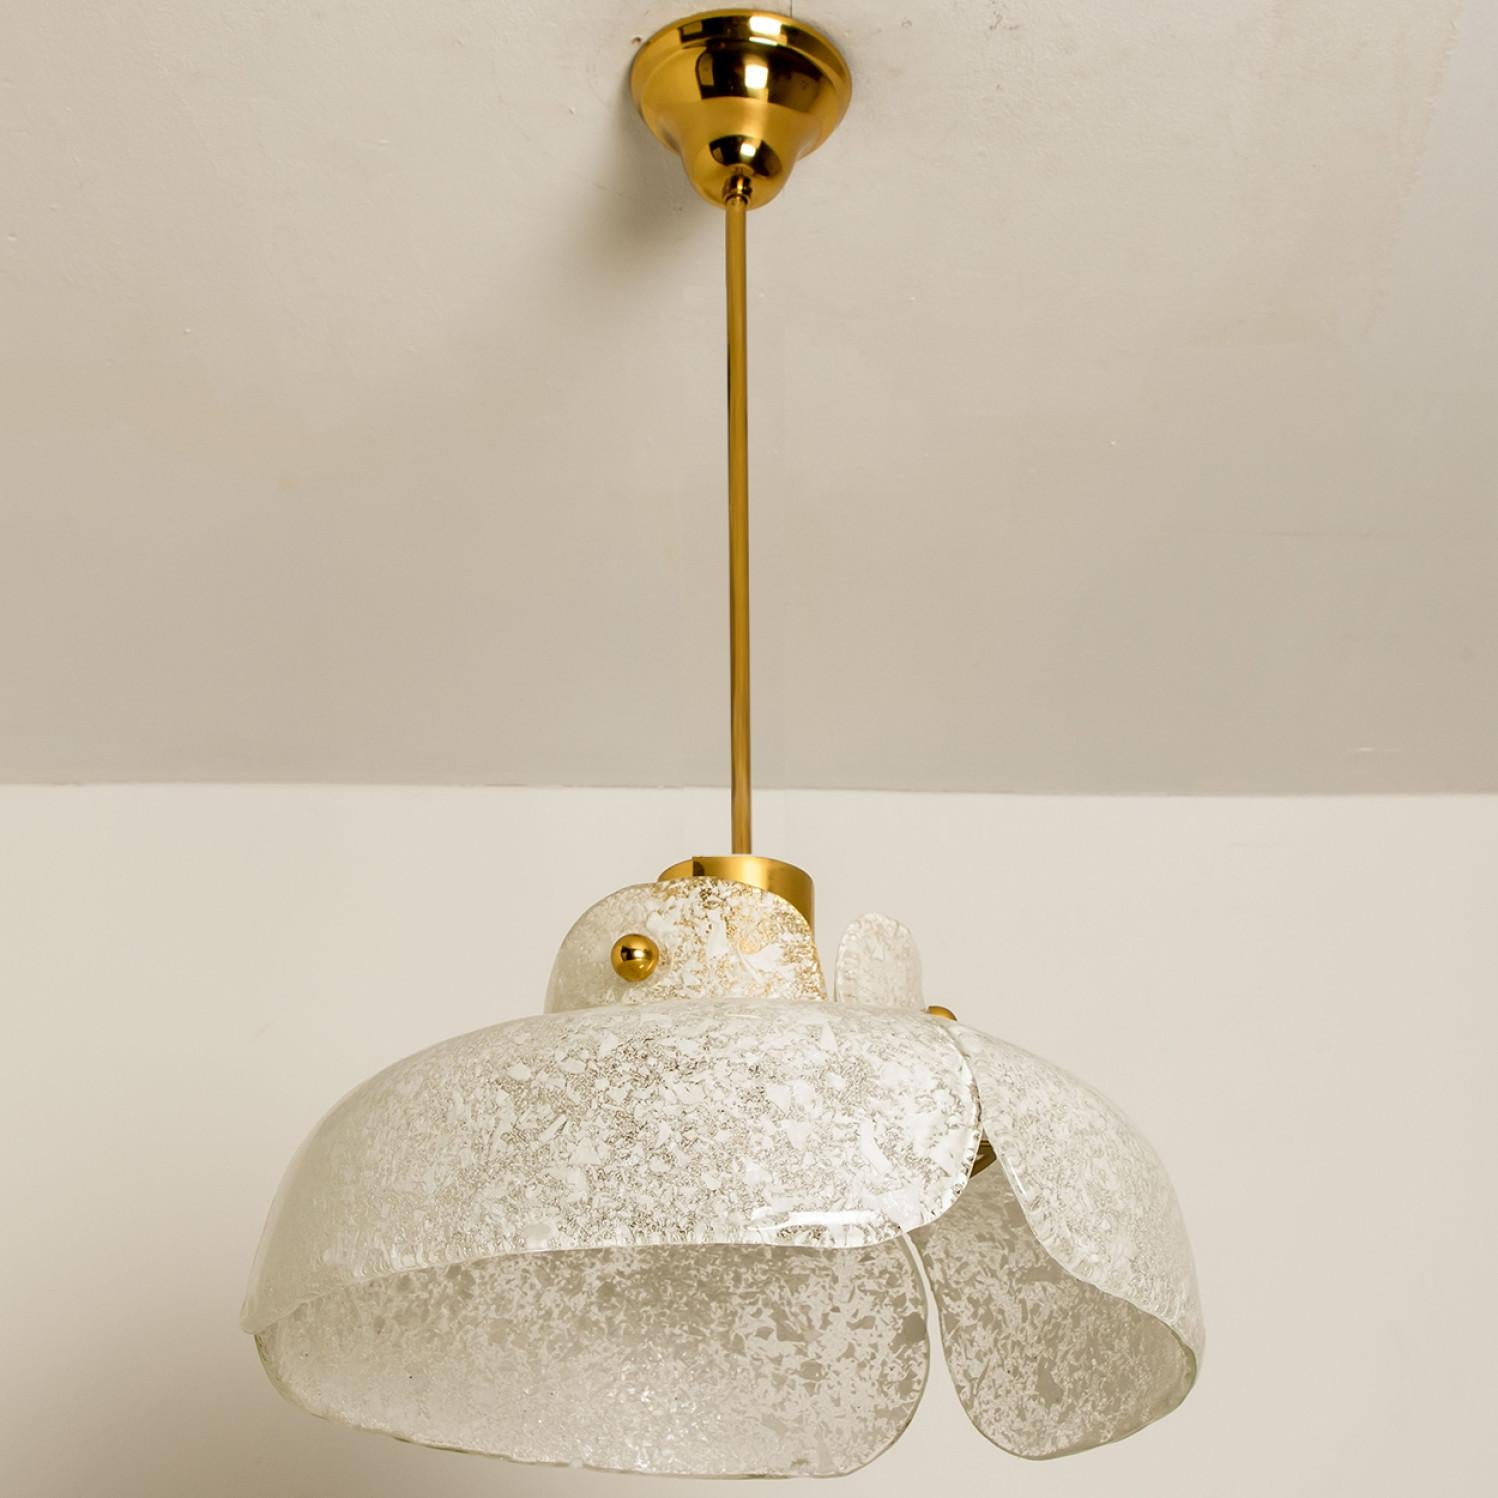 Pendant Flower Lamp by Hillebrand, Europe, Germany In Good Condition For Sale In Rijssen, NL